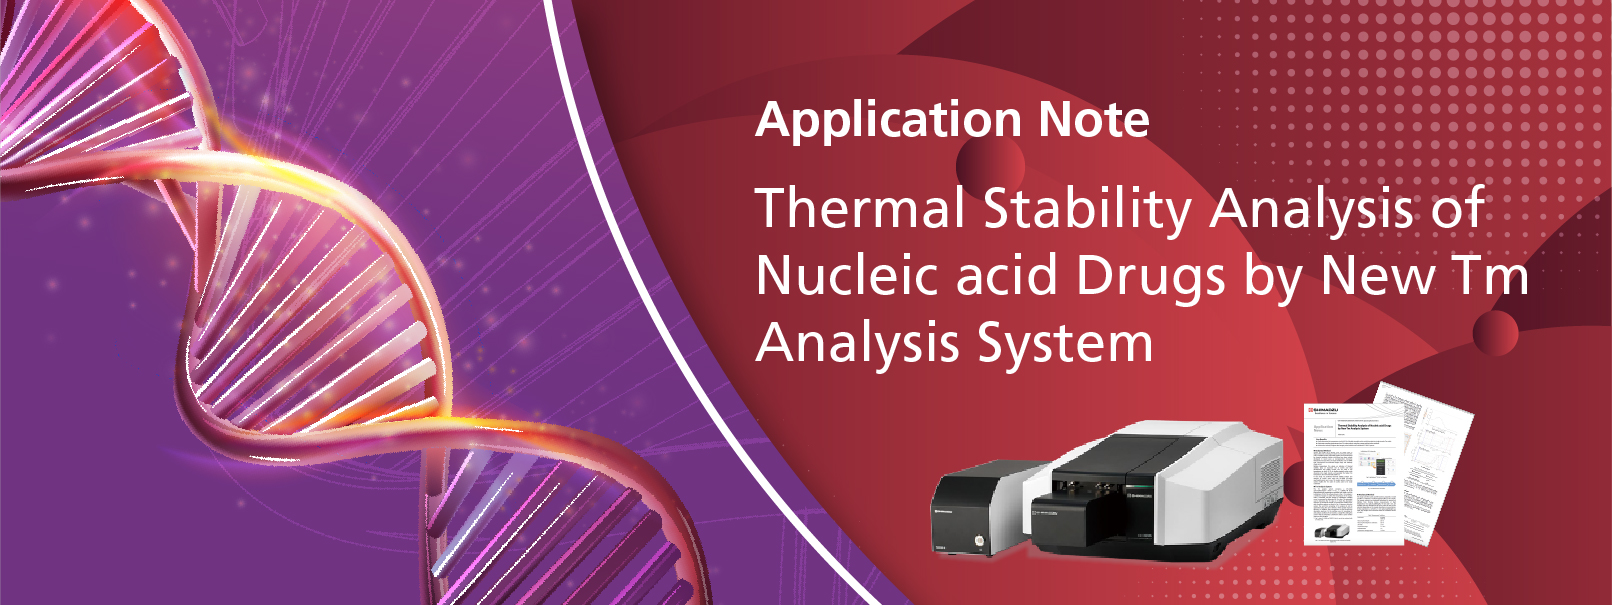 Thermal Stability Analysis of Nucleic acid Drugs by New Tm Analysis System